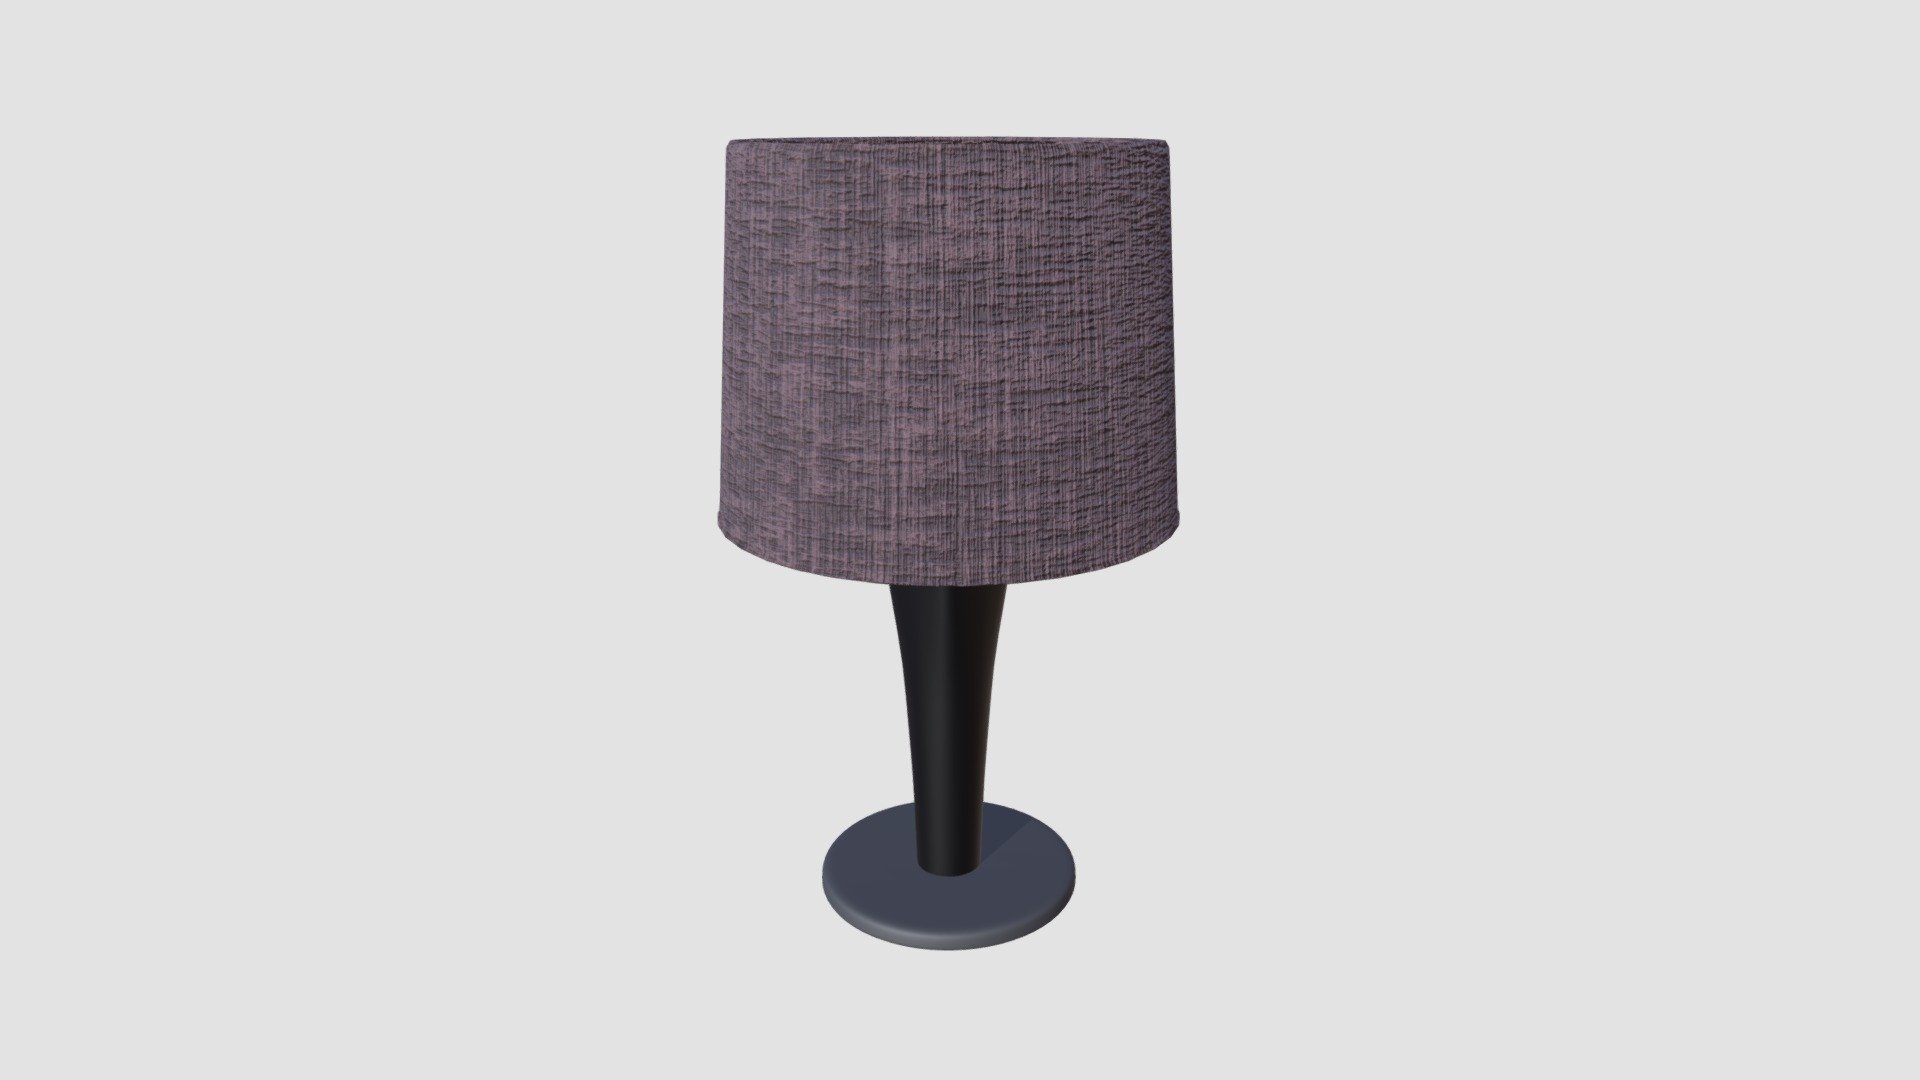 Highly detailed 3d model of lamp with all textures, shaders and materials. It is ready to use, just put it into your scene 3d model